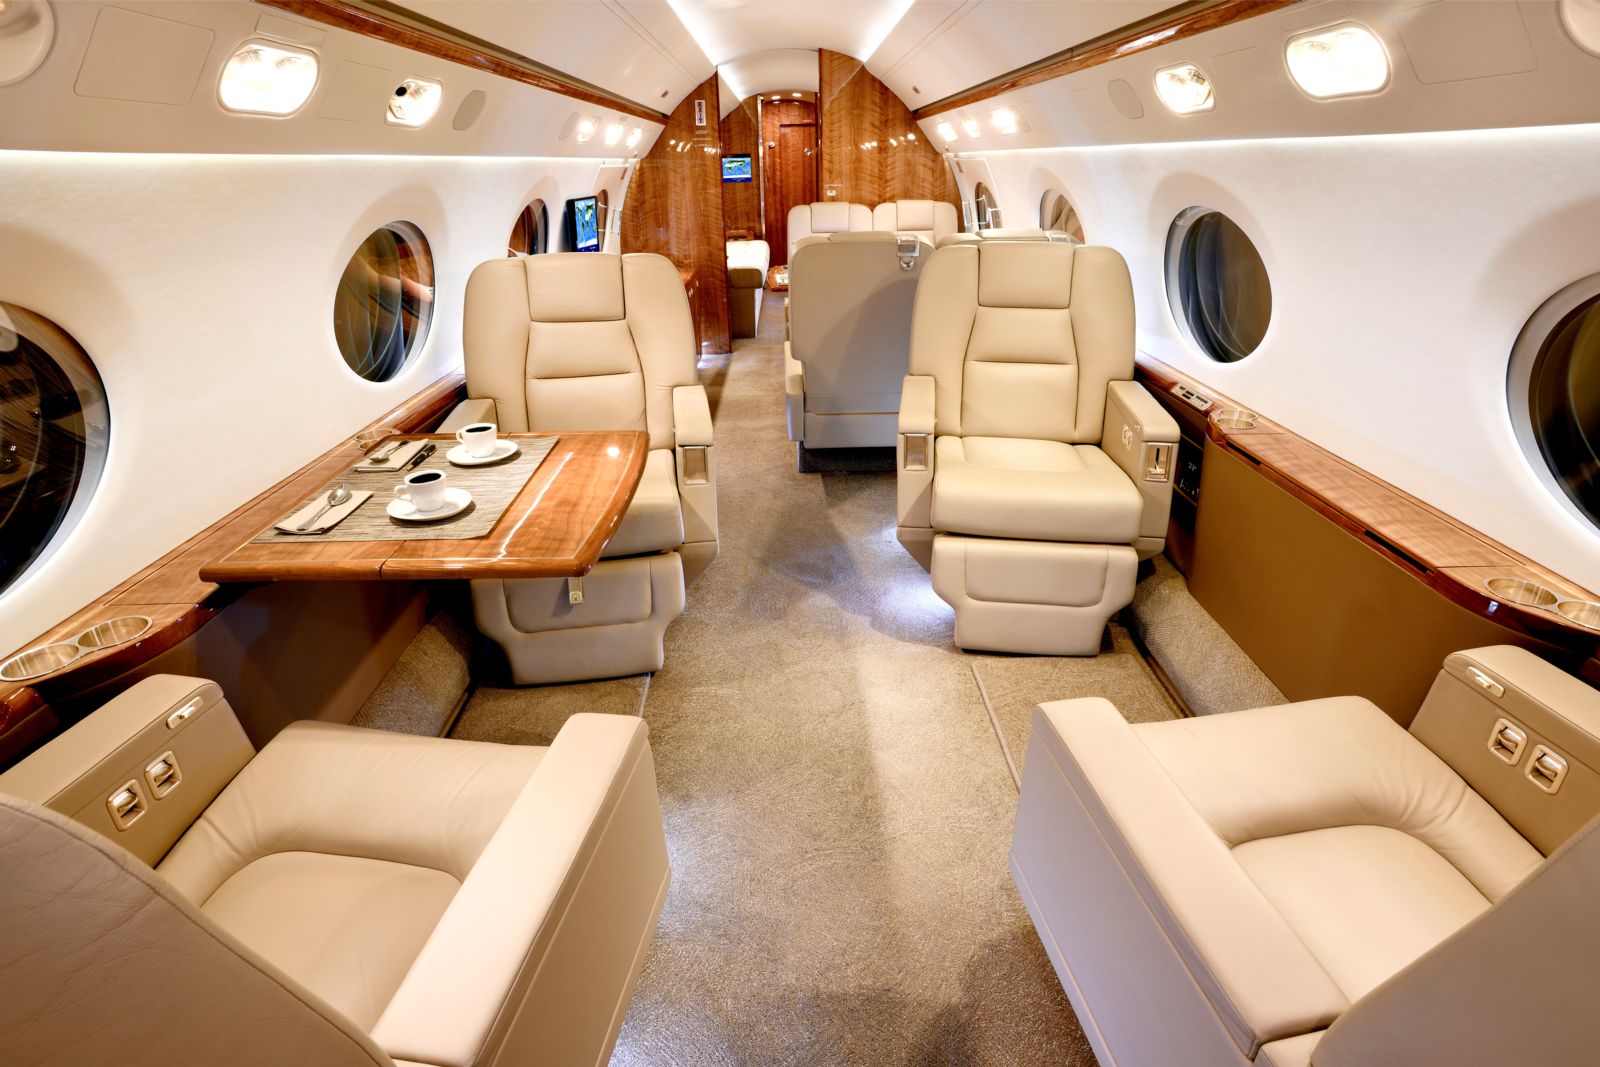 Gulfstream G550  S/N 5389 for sale | gallery image: /userfiles/images/G550_SN5389/fwd%20aft.jpg